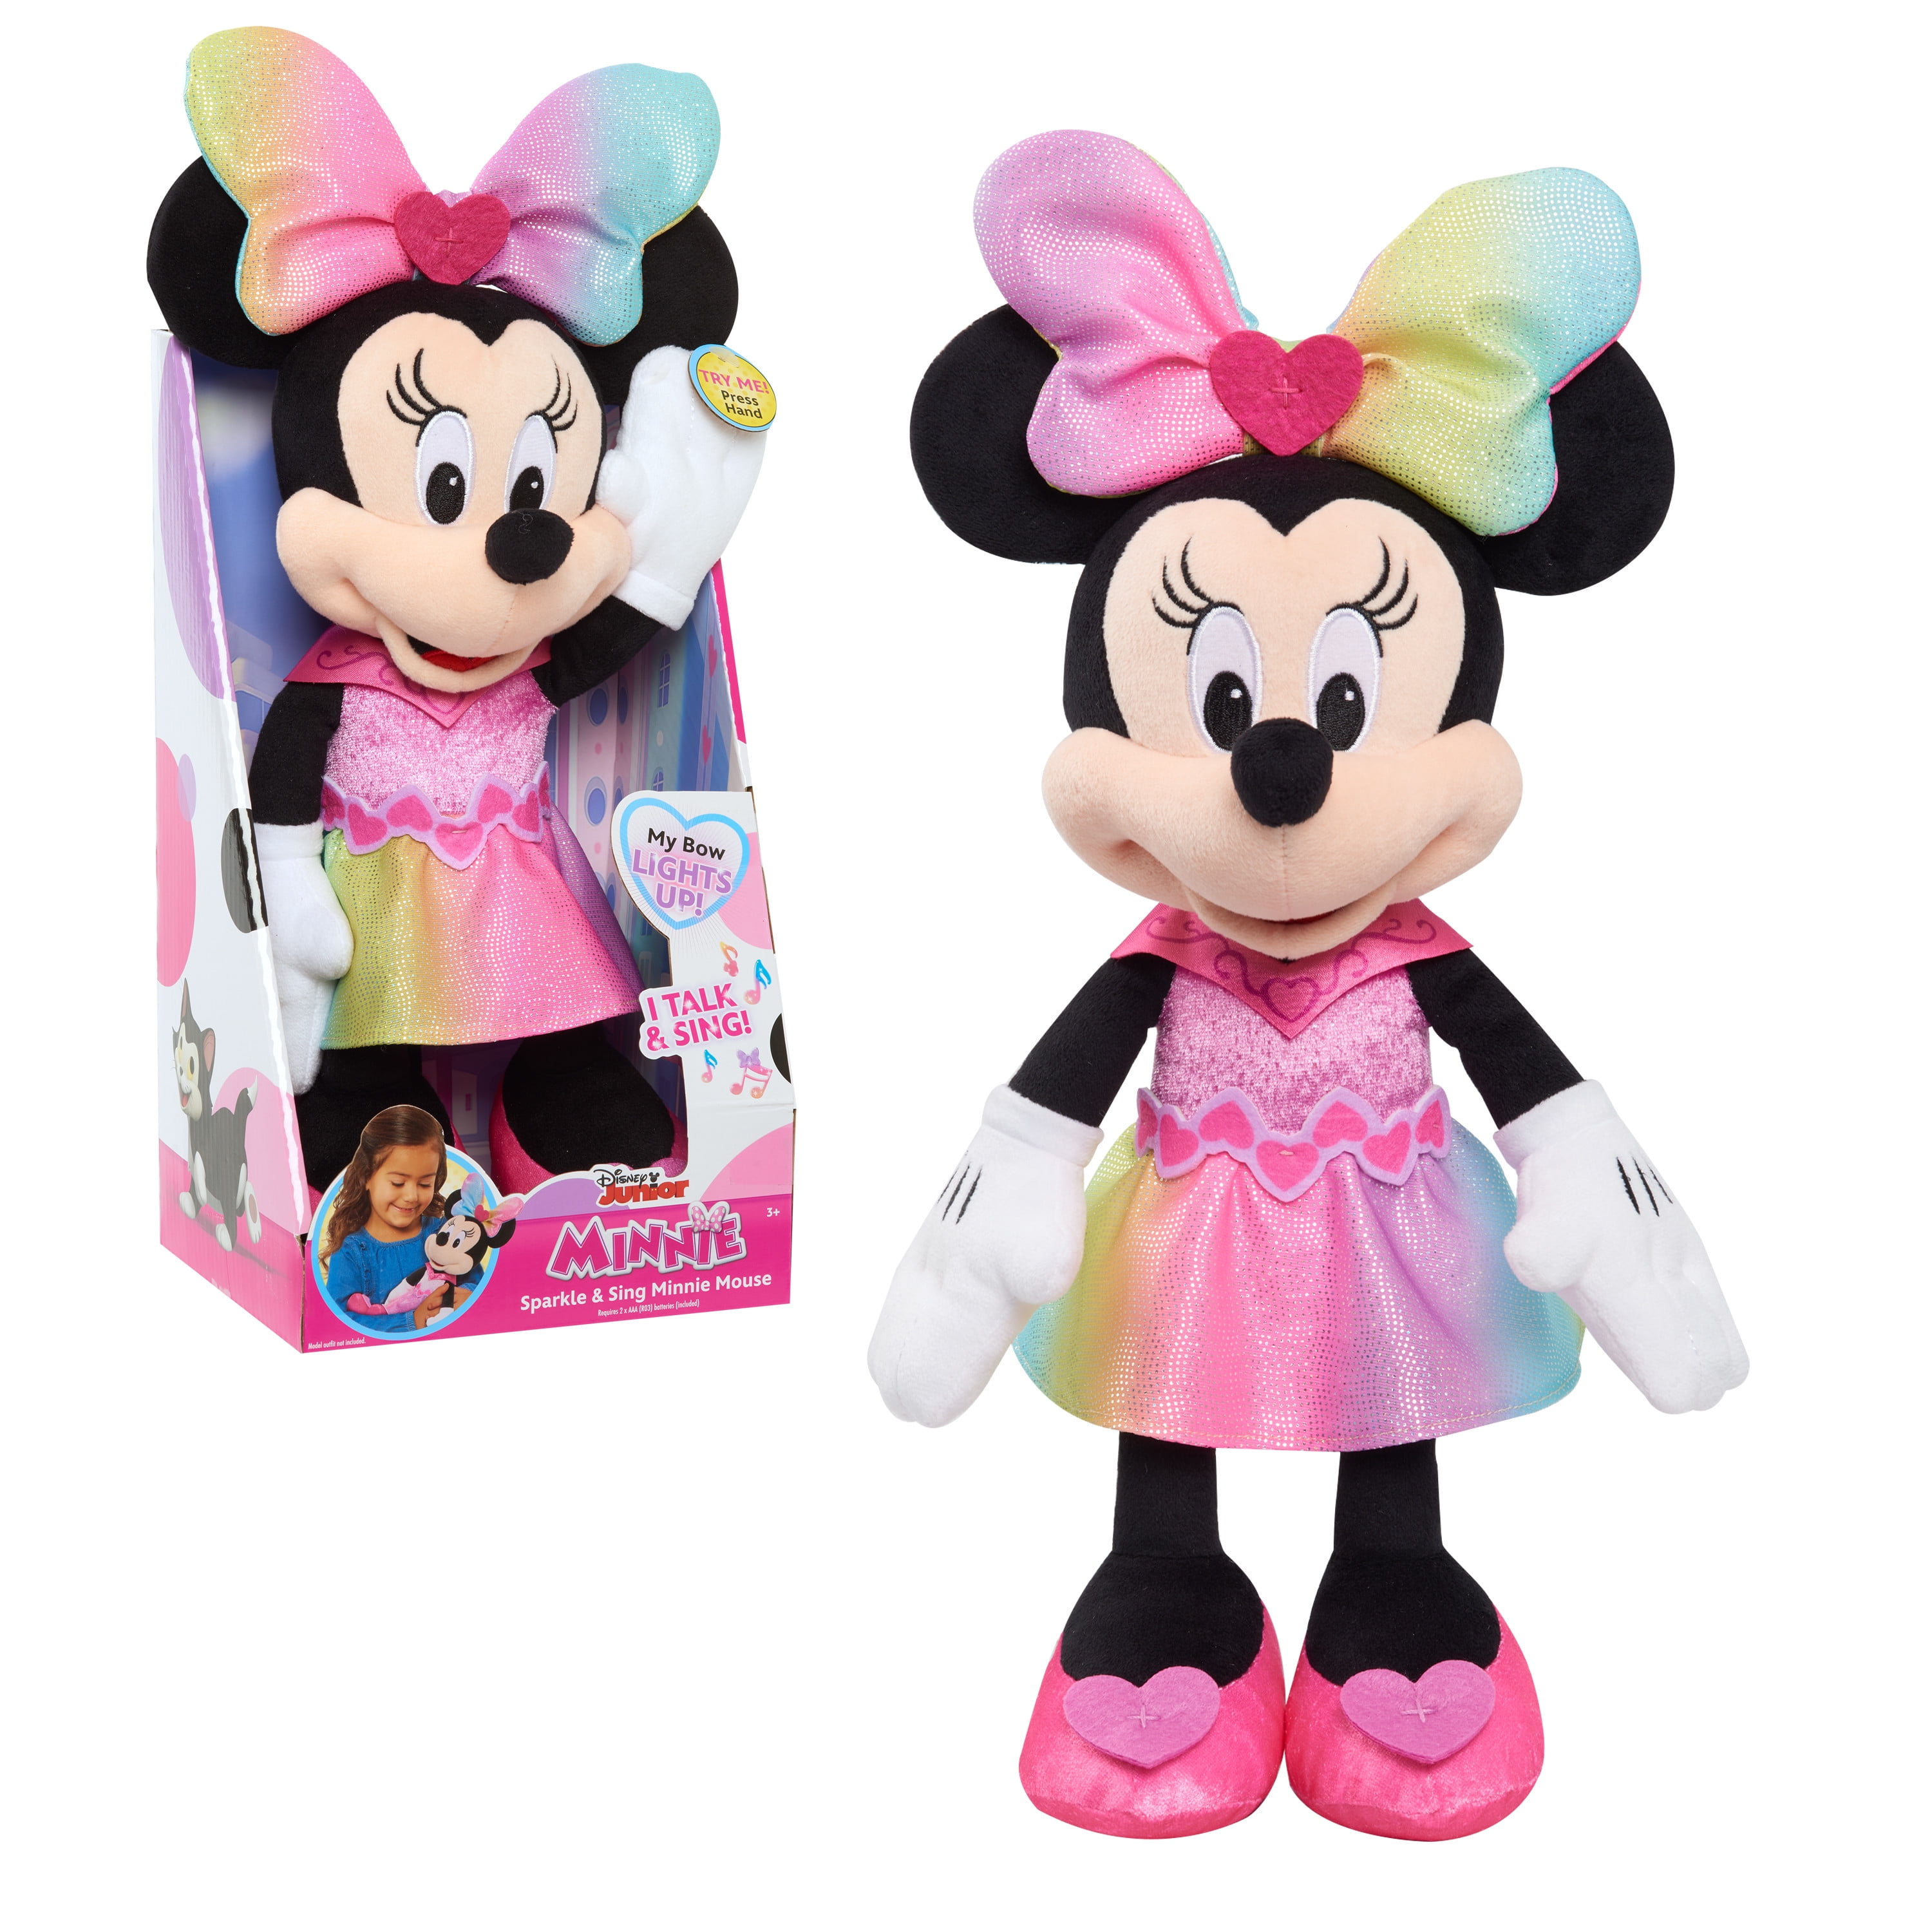 Disney Junior Minnie Mouse Sparkle and Sing Minnie Mouse, 13 Inch Feature Plush with Lights and Sounds, Officially Licensed Kids Toys for Ages 3 Up, Gifts and Presents